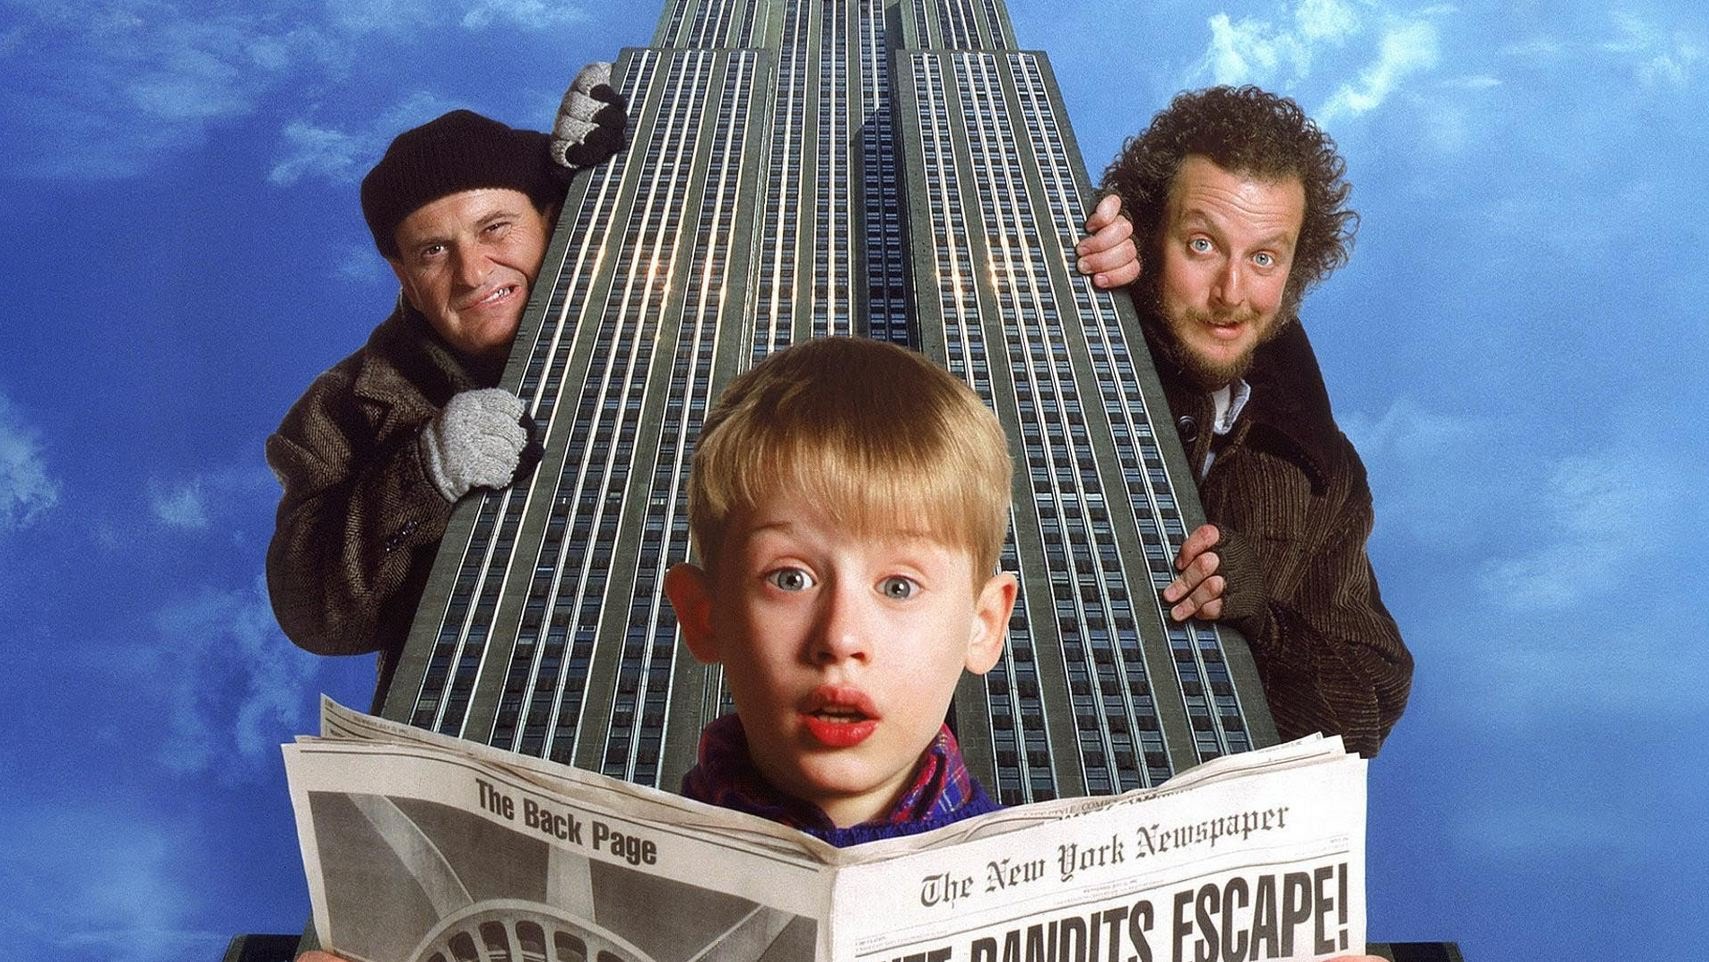 Success of Trump Motivates Other Extras of Home Alone 2: Lost In New York